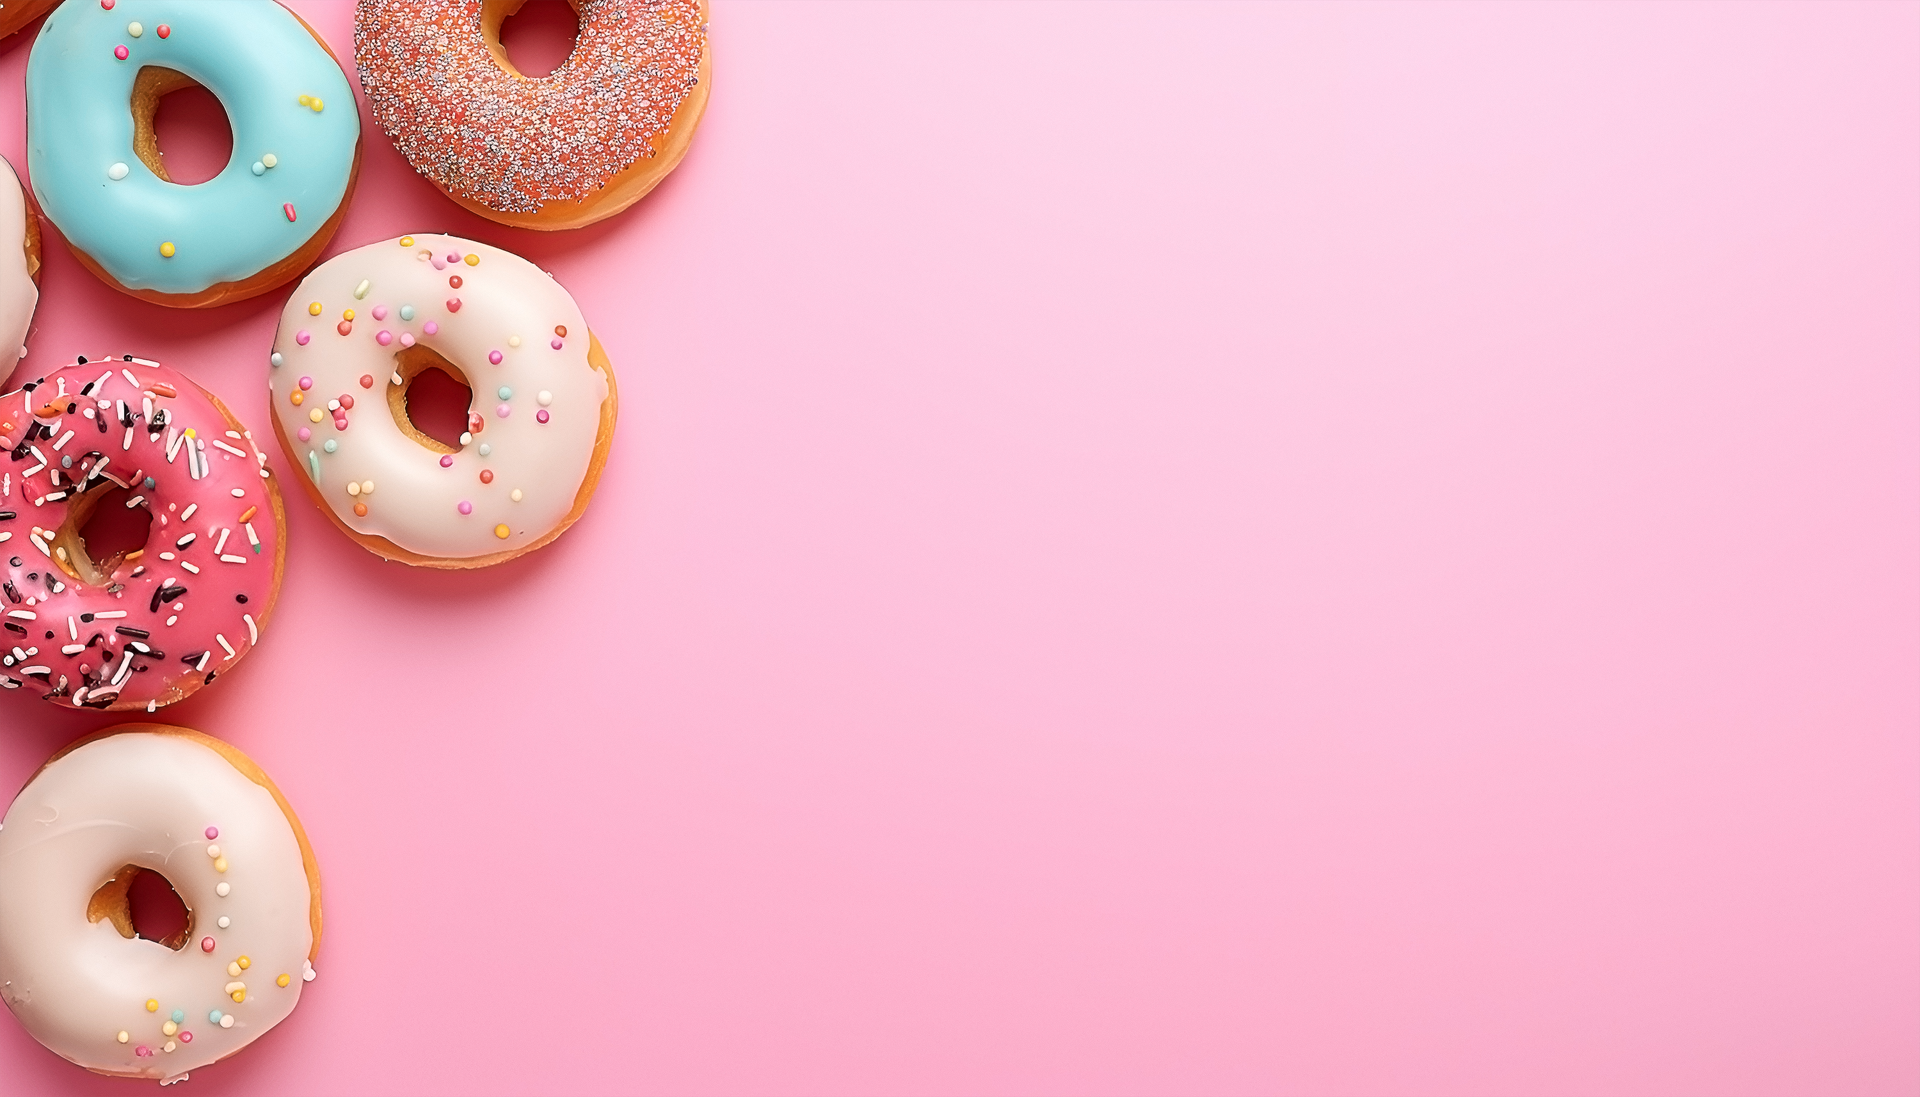 Some donut on the left, light pink background, with copy space, top view  27182606 PNG